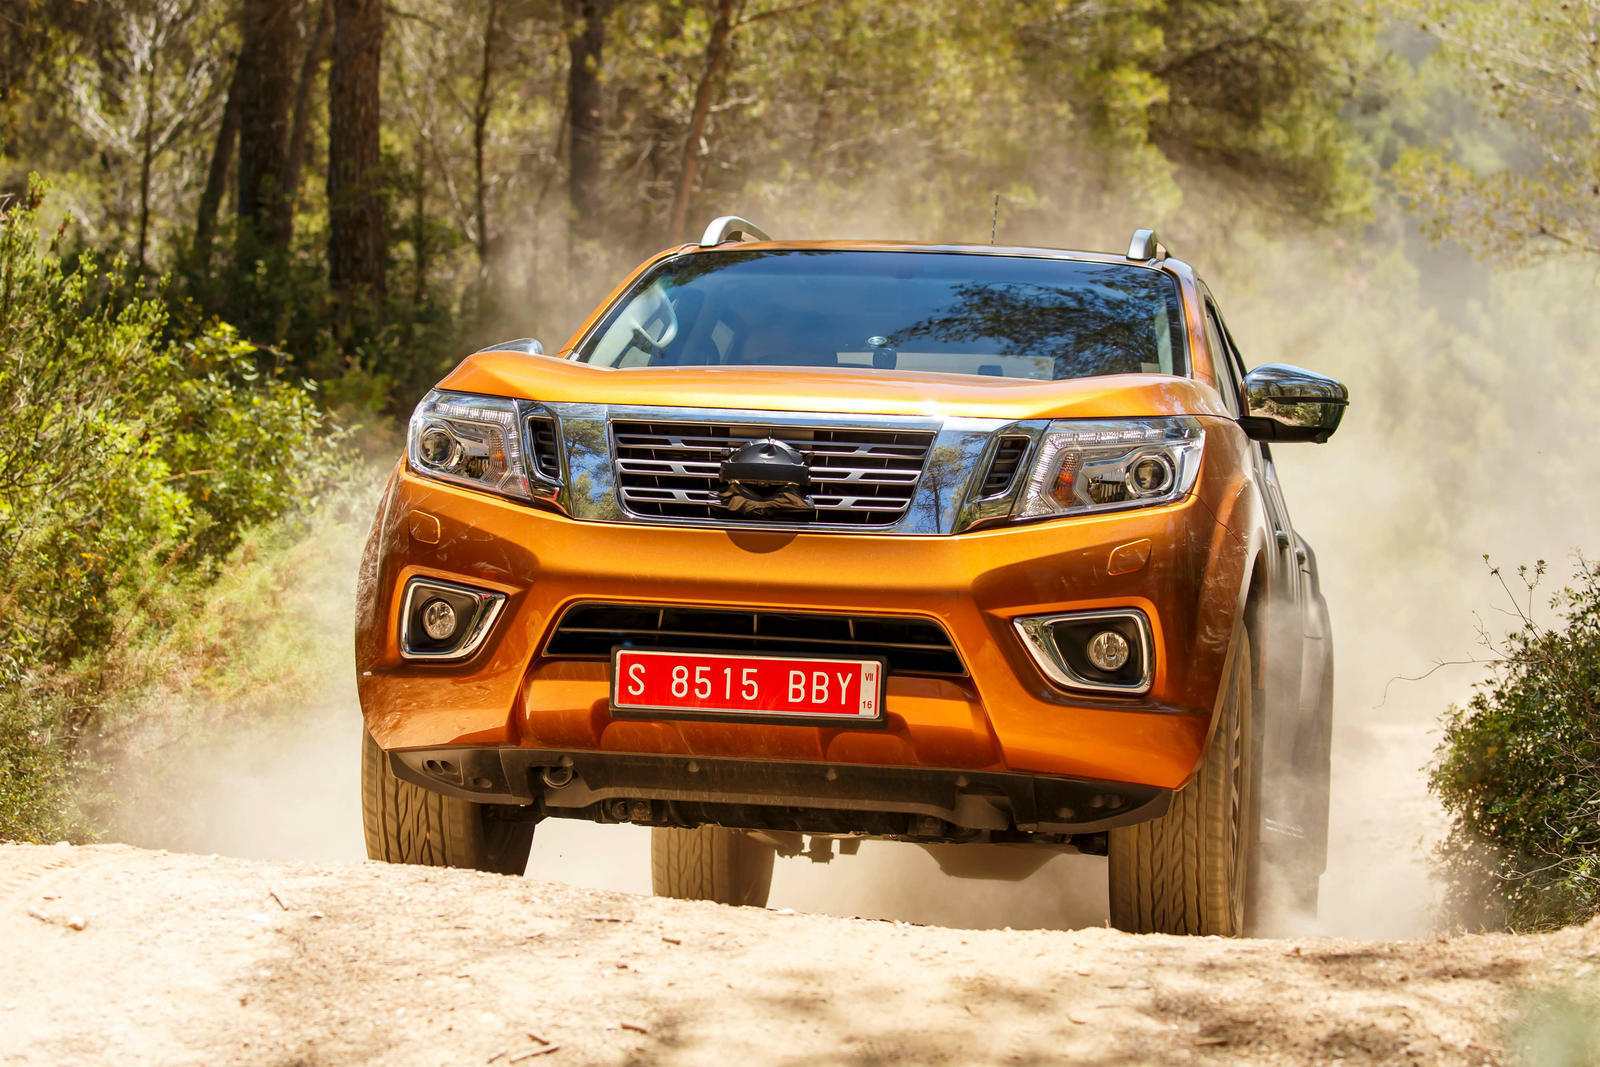 137219_The All-New Nissan Navara_ Raising the bar for style and performance in the